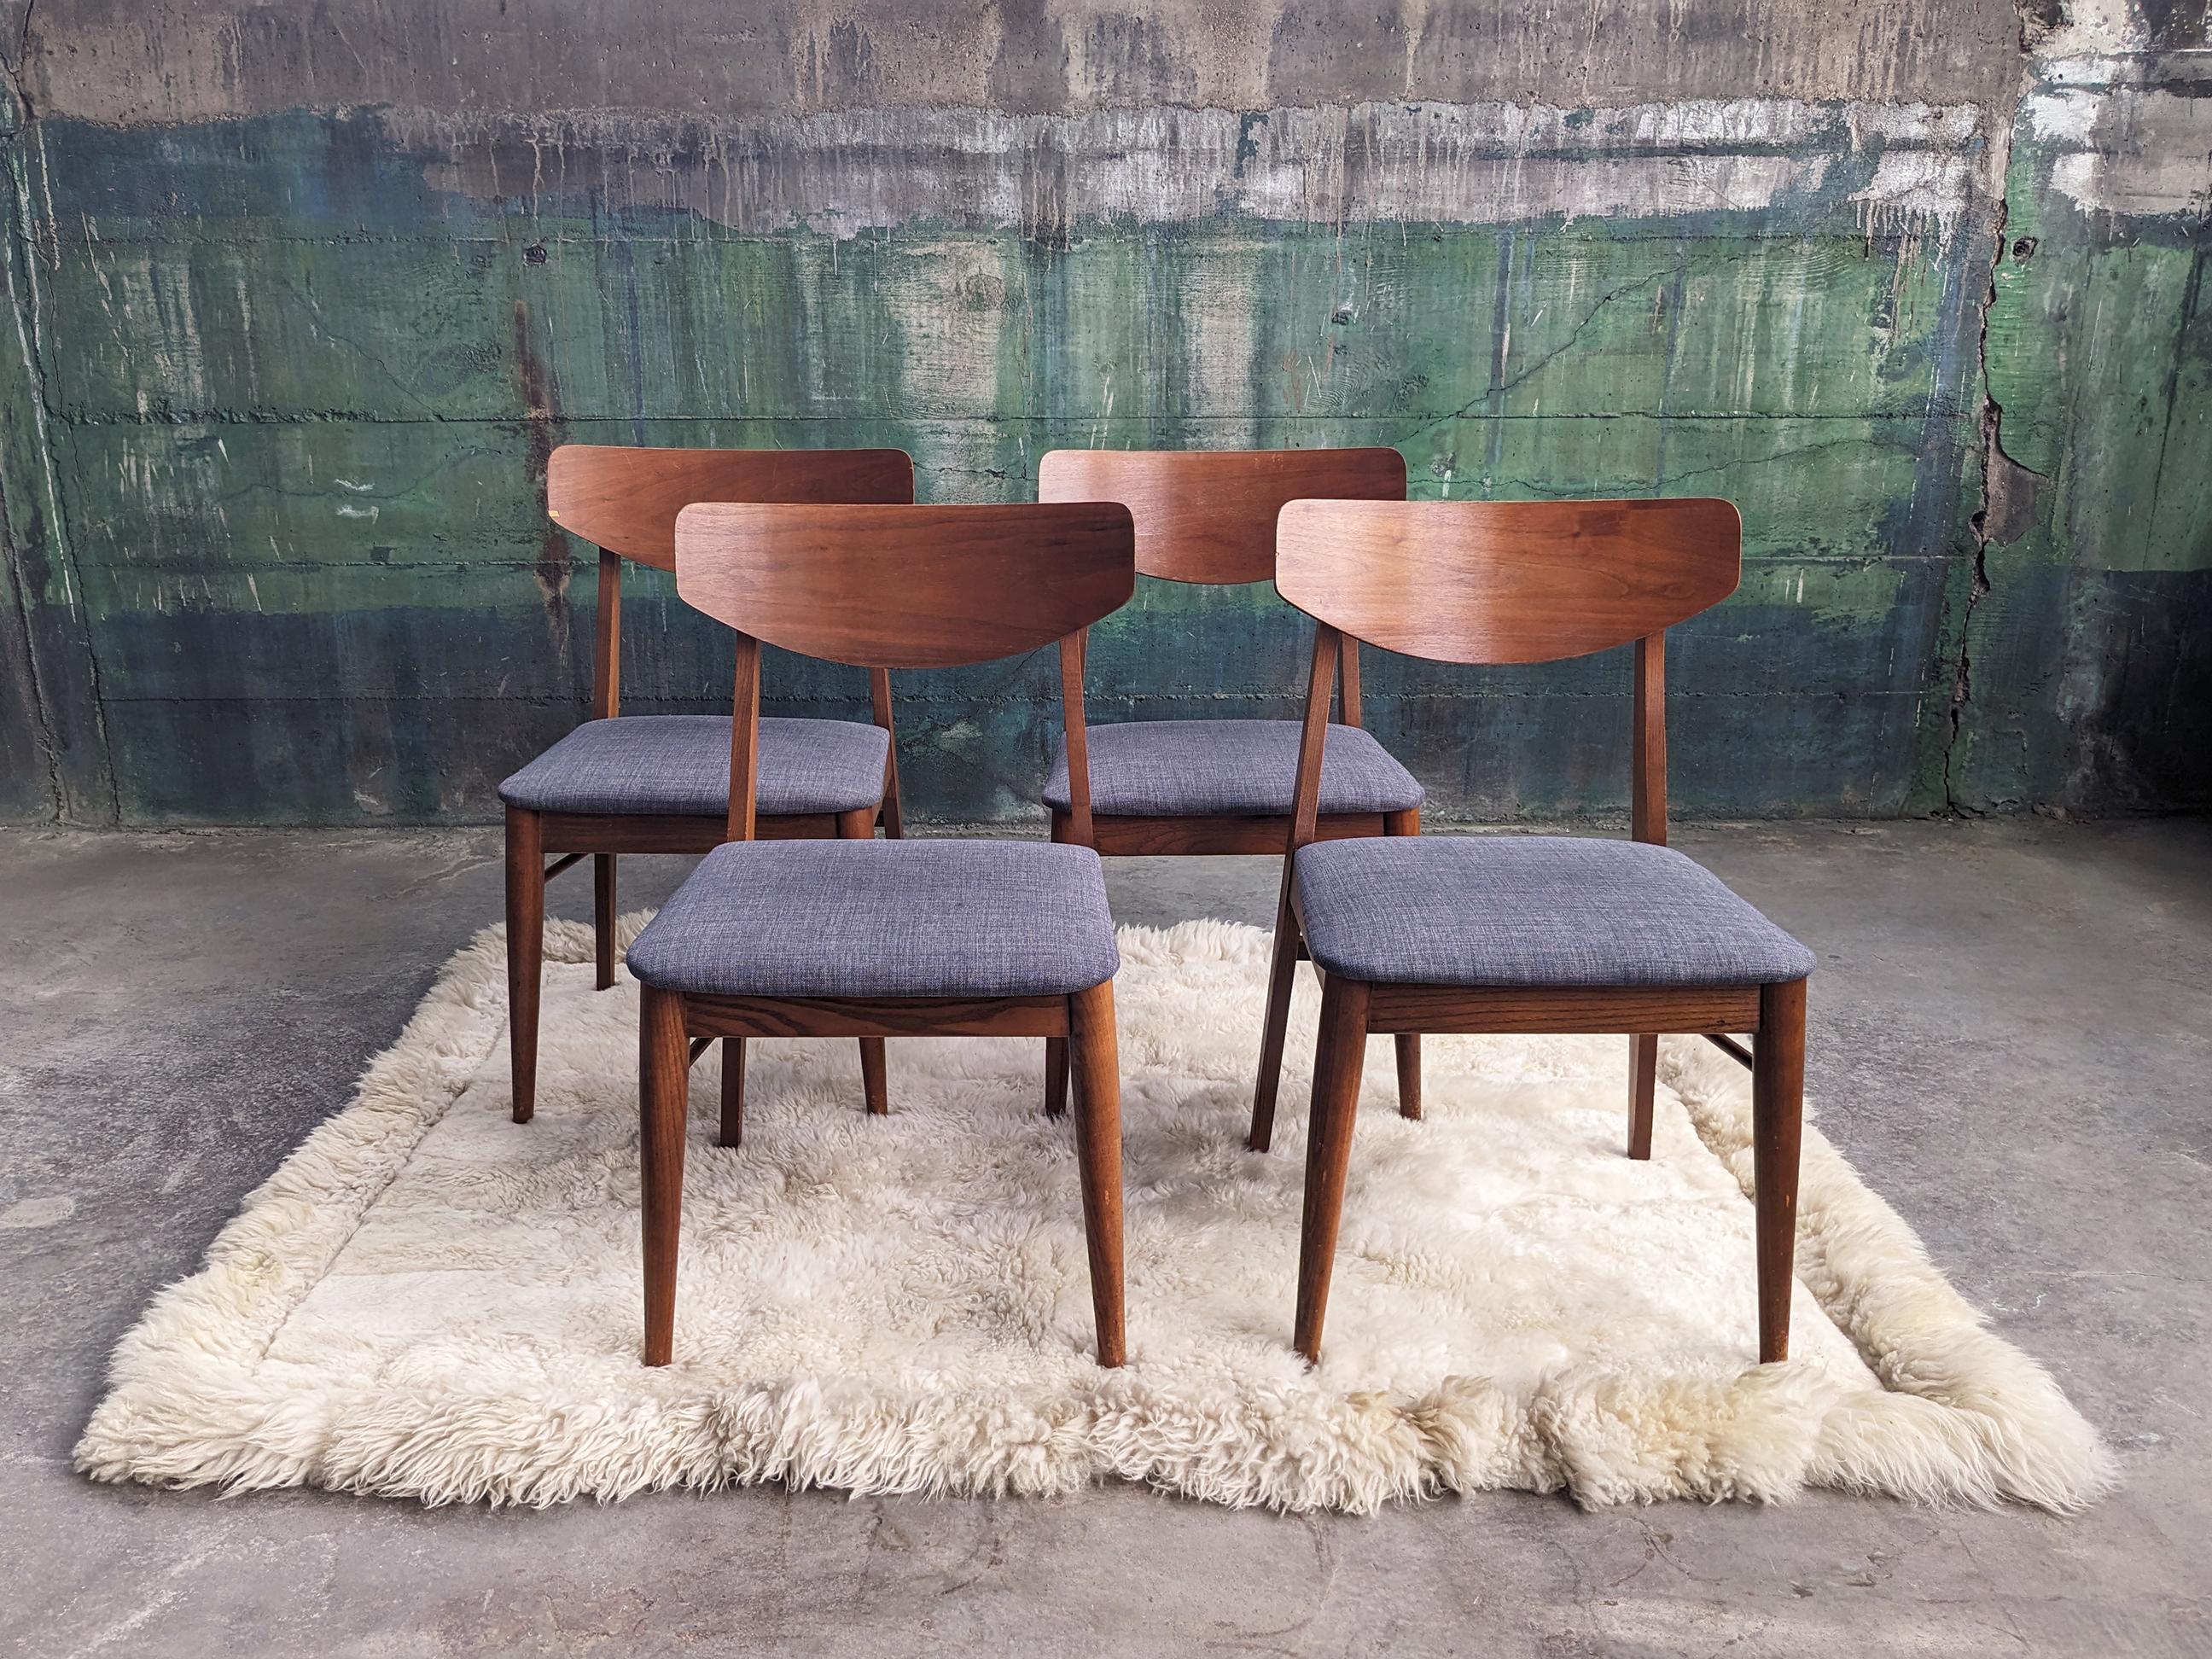 Beautiful and very high end set of four Walnut dining chairs, for Stanley Furniture by Paul Browning, circa 1960s.

These chairs are in excellent vintage conditon, appearing only very lightly used, and they have been reupholstered in a beautiful